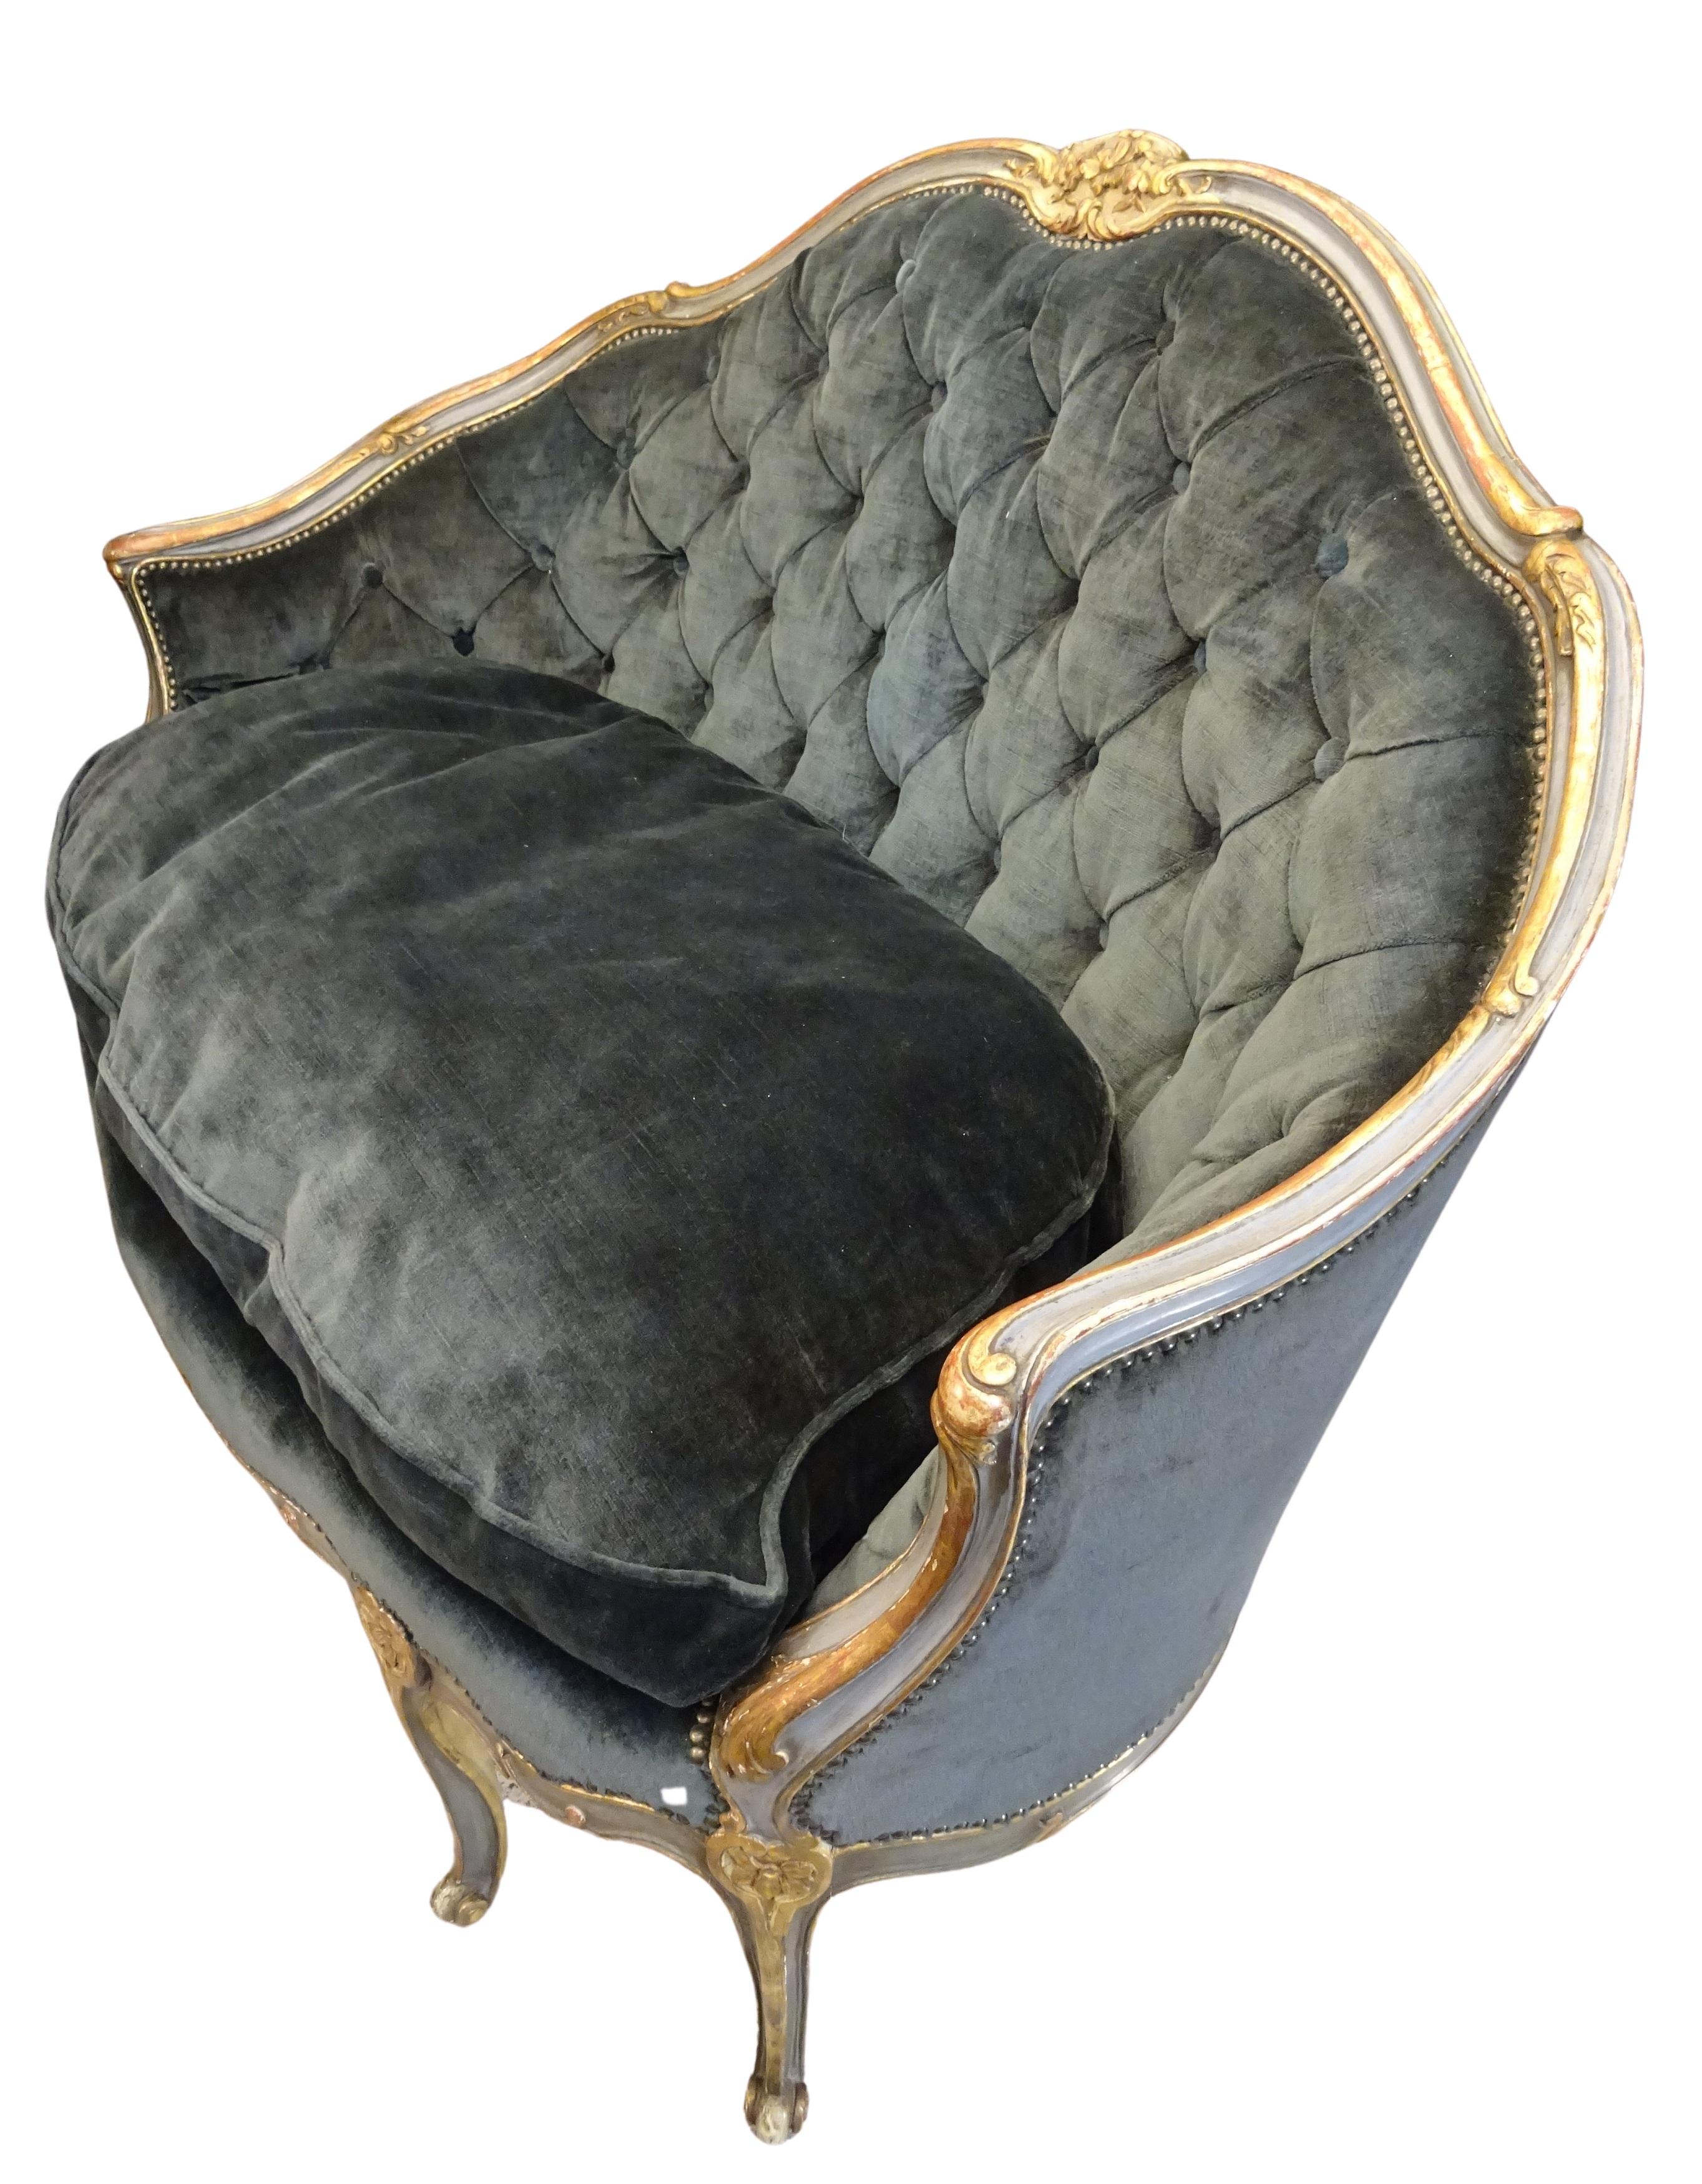 Outstanding sofa Corbeille, France, 19th century, Napoleon III, in grey hand painted and gilded wood and upholstered in an amazing grey color velvet .In a very good condition with age and use
Carved floral wood and gilded with scrolls and